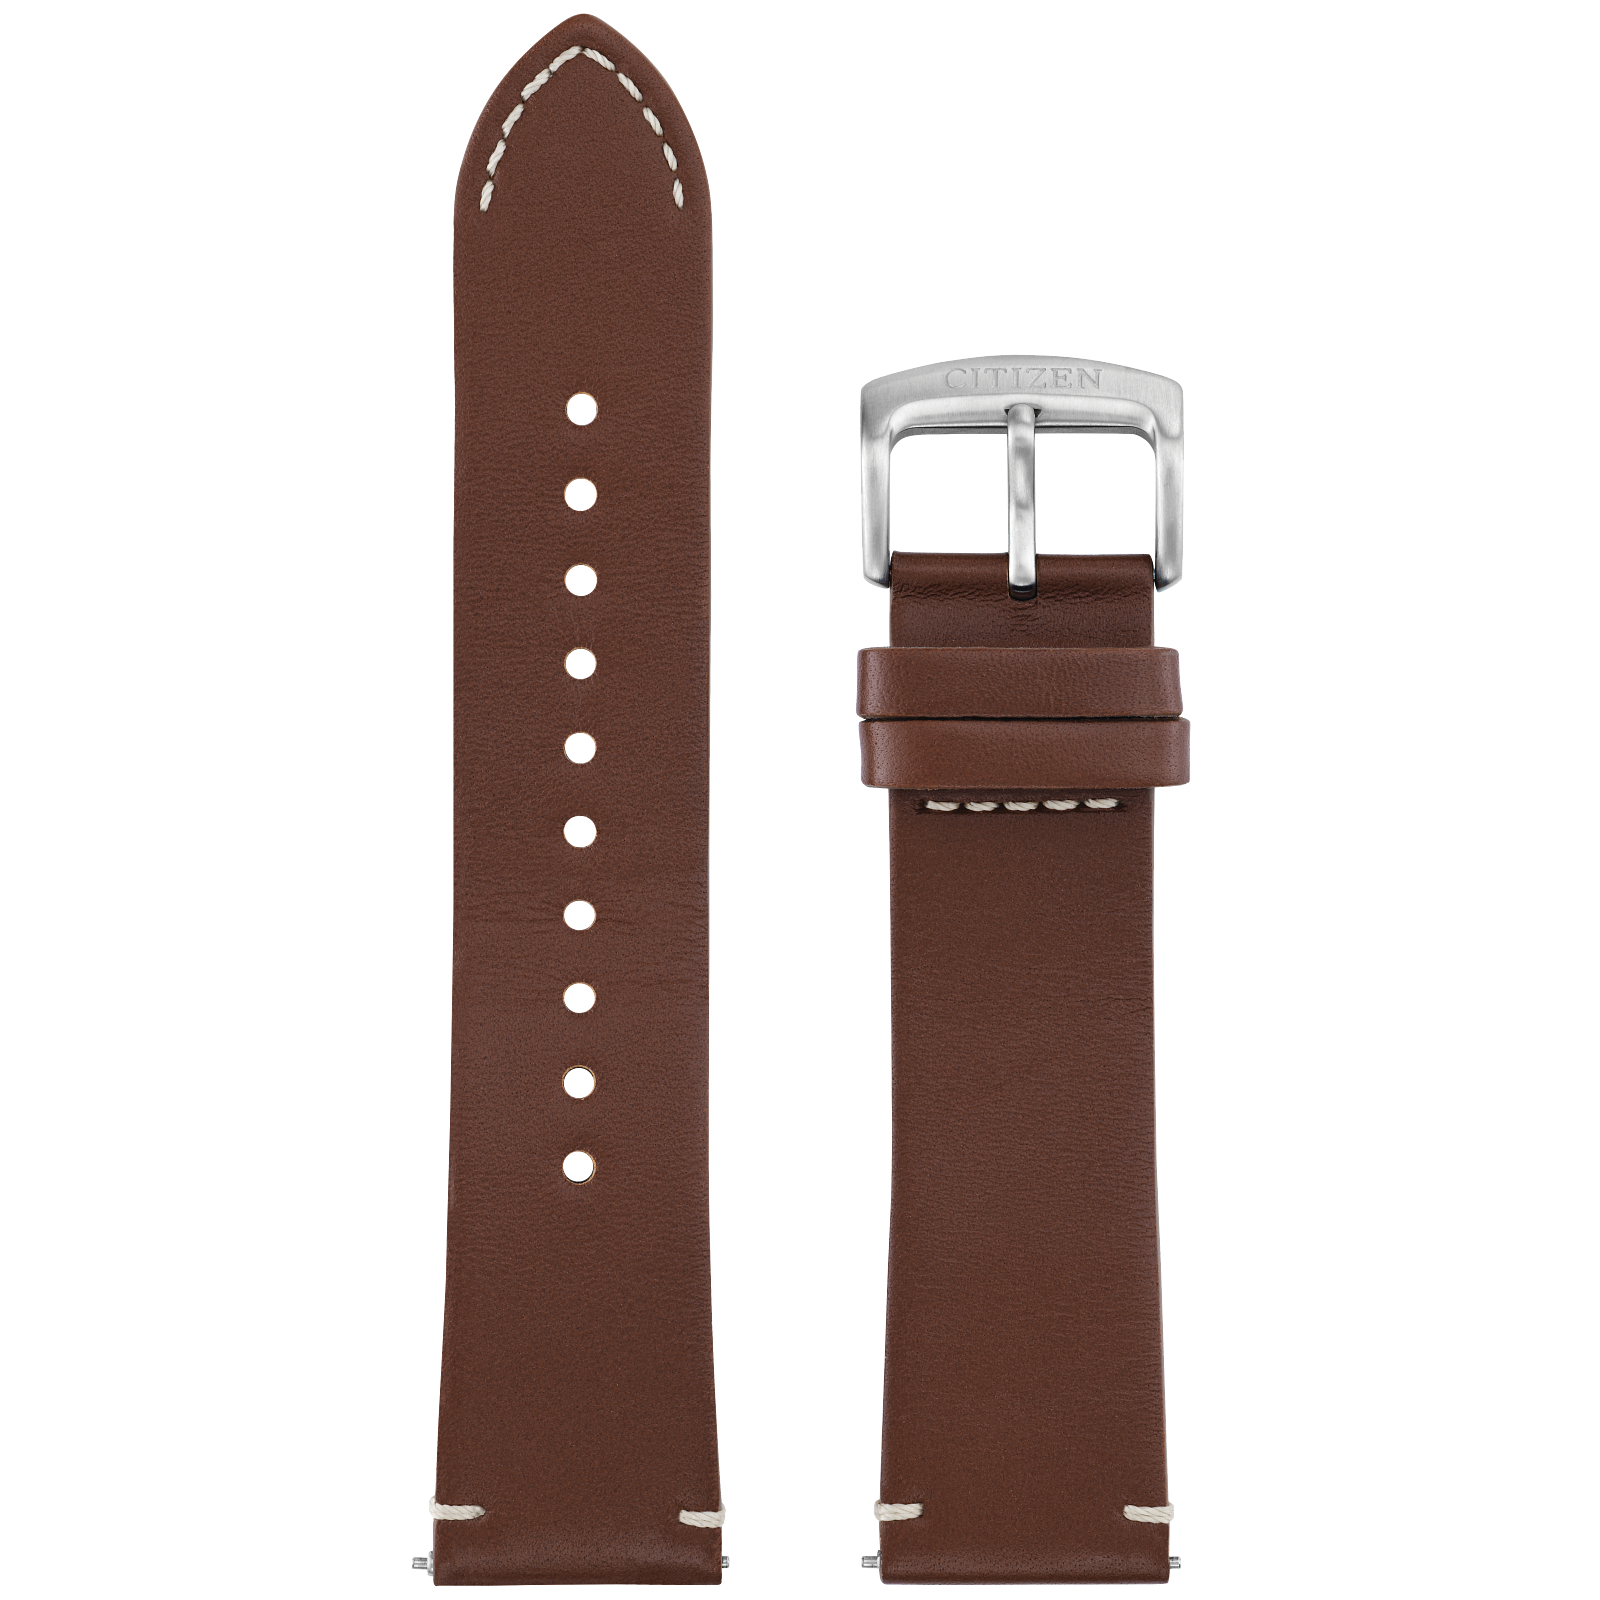 https://citizenwatch.widen.net/content/ubovkqbpjw/png/Brown+Leather+Strap+%2822mm%29.png?u=41zuoe&width=1600&height=1600&quality=80&crop=false&keep=c&color=FFFFFF00